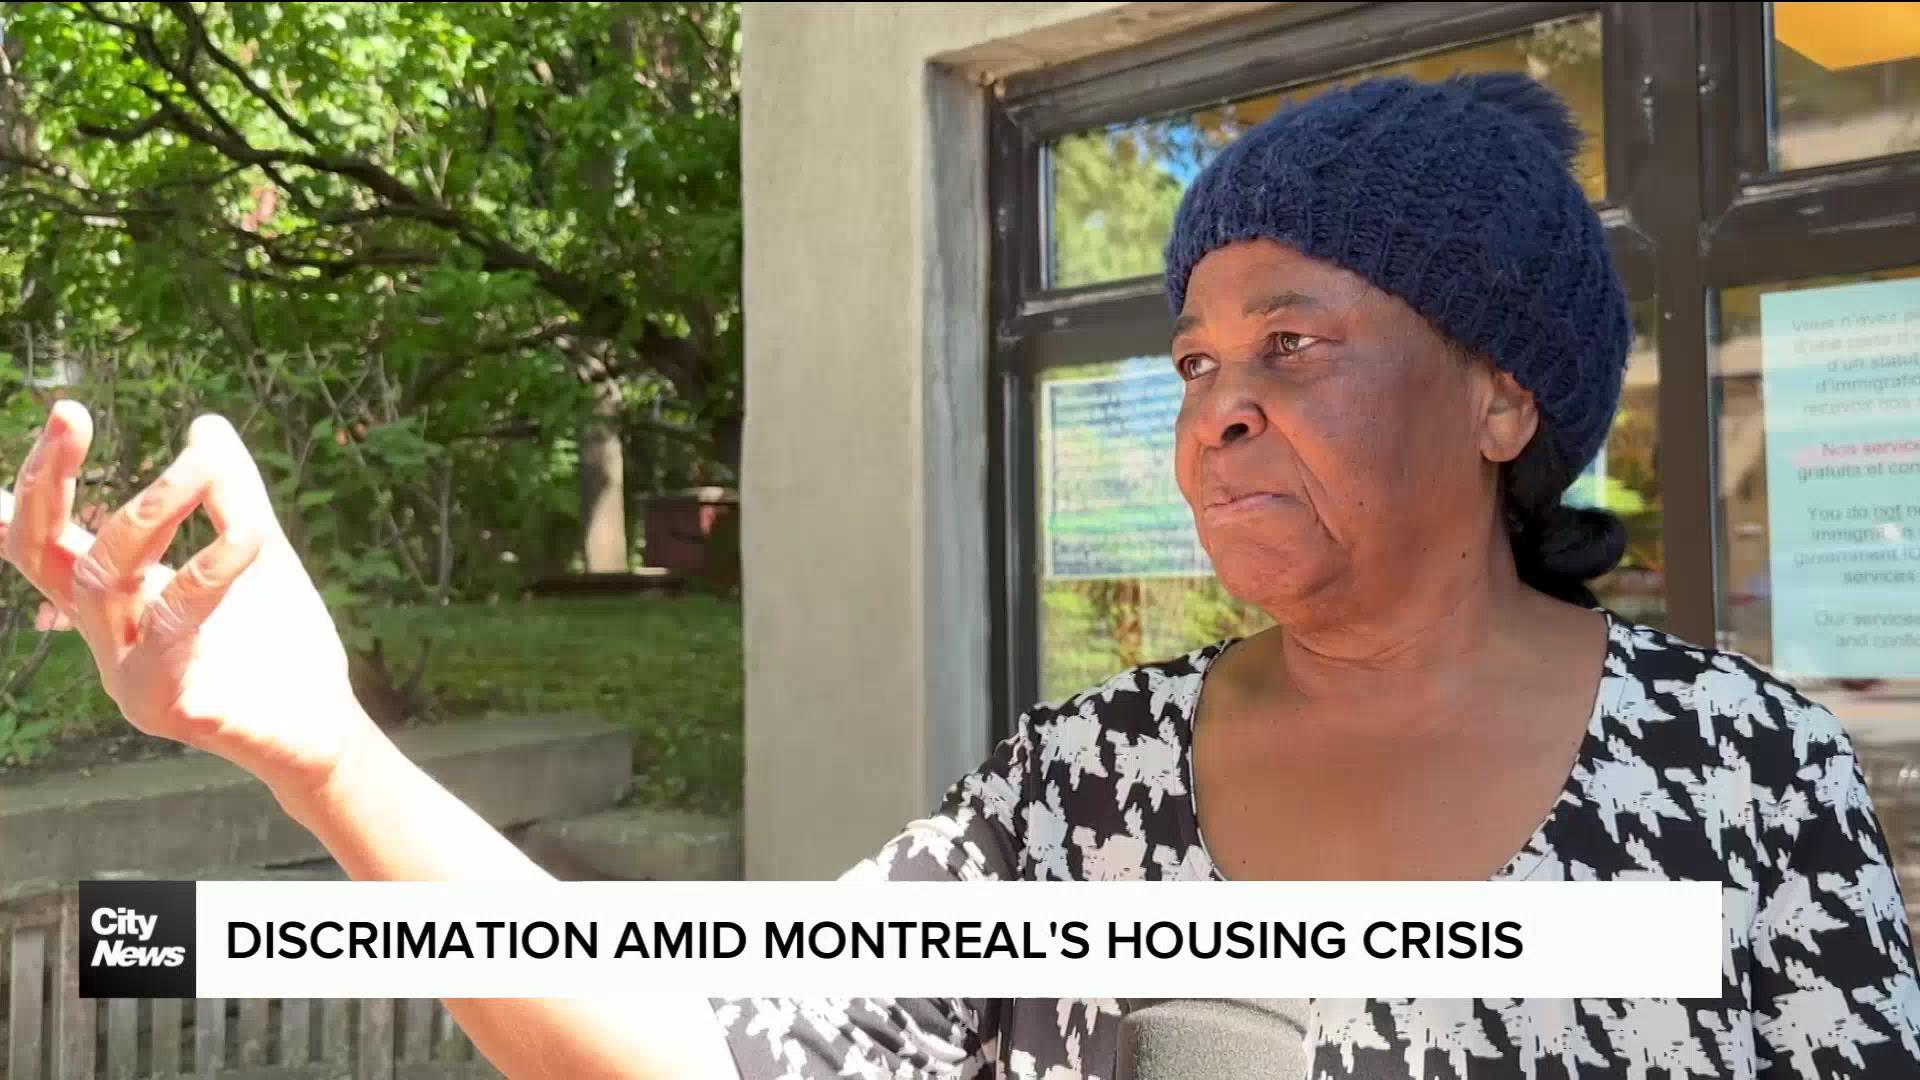 Montreal's housing crisis: Patricia's struggle with homelessness